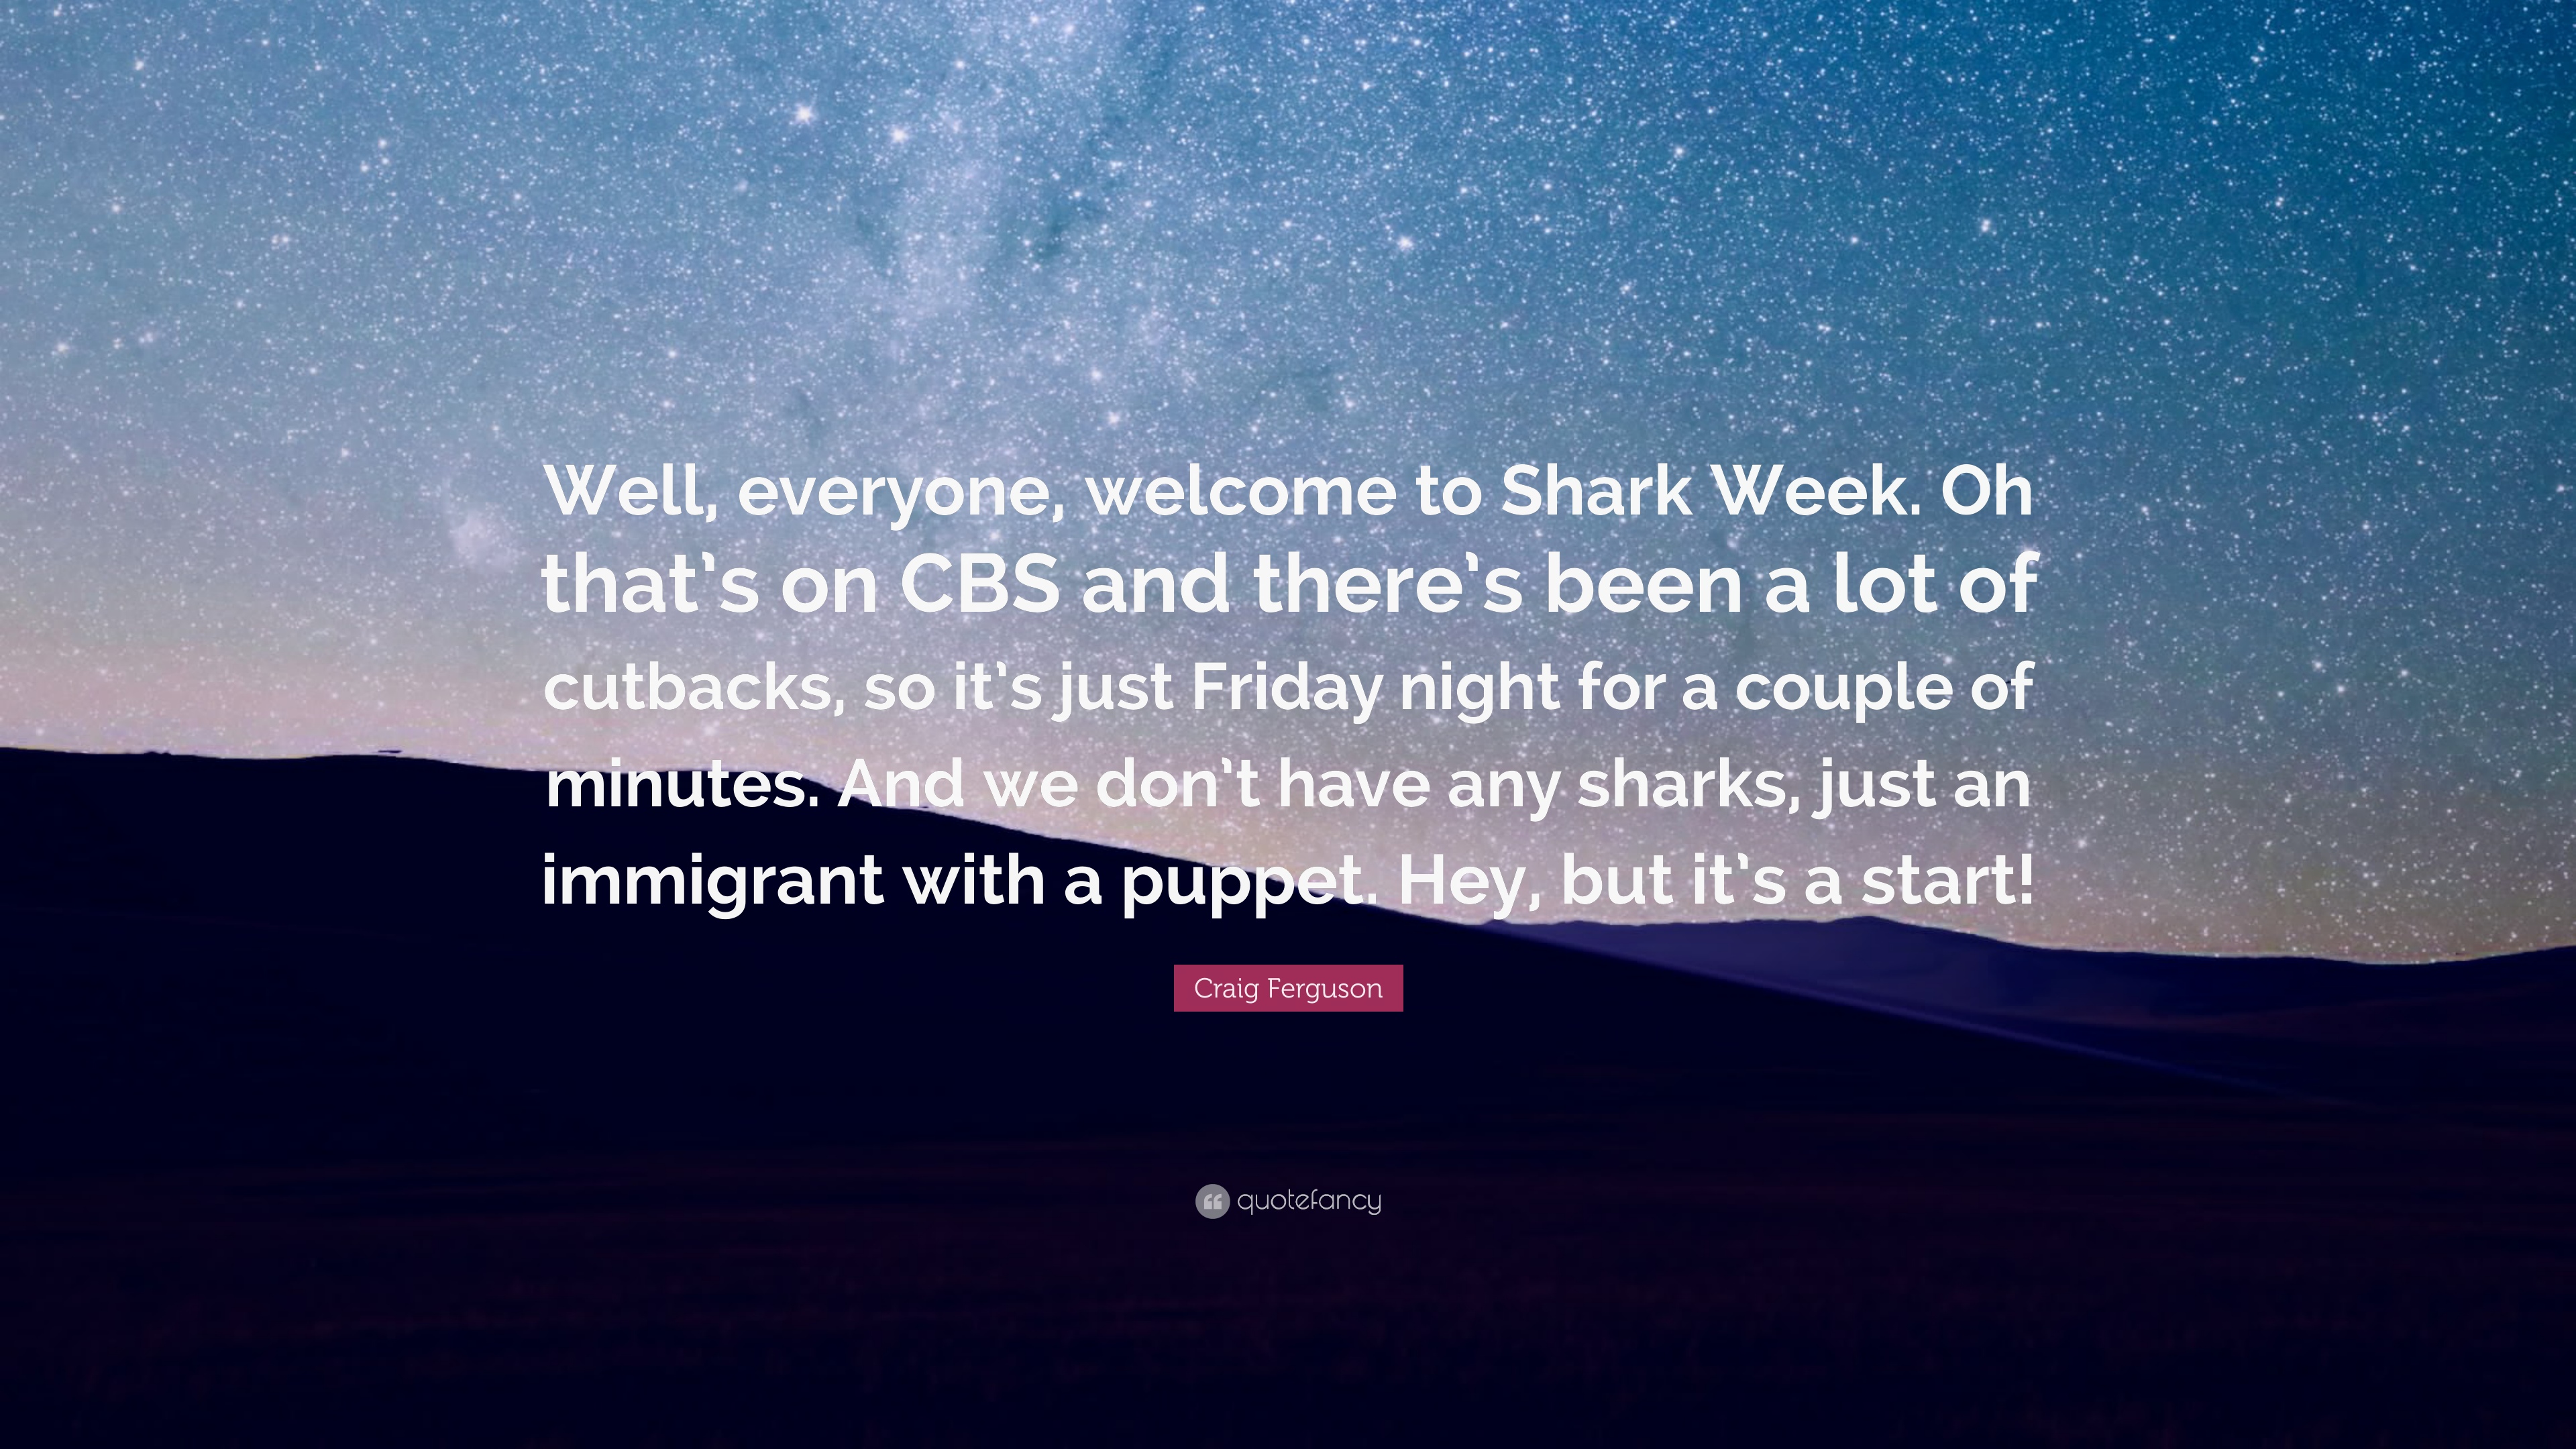 Craig Ferguson Quote: “Well, everyone, welcome to Shark Week. Oh